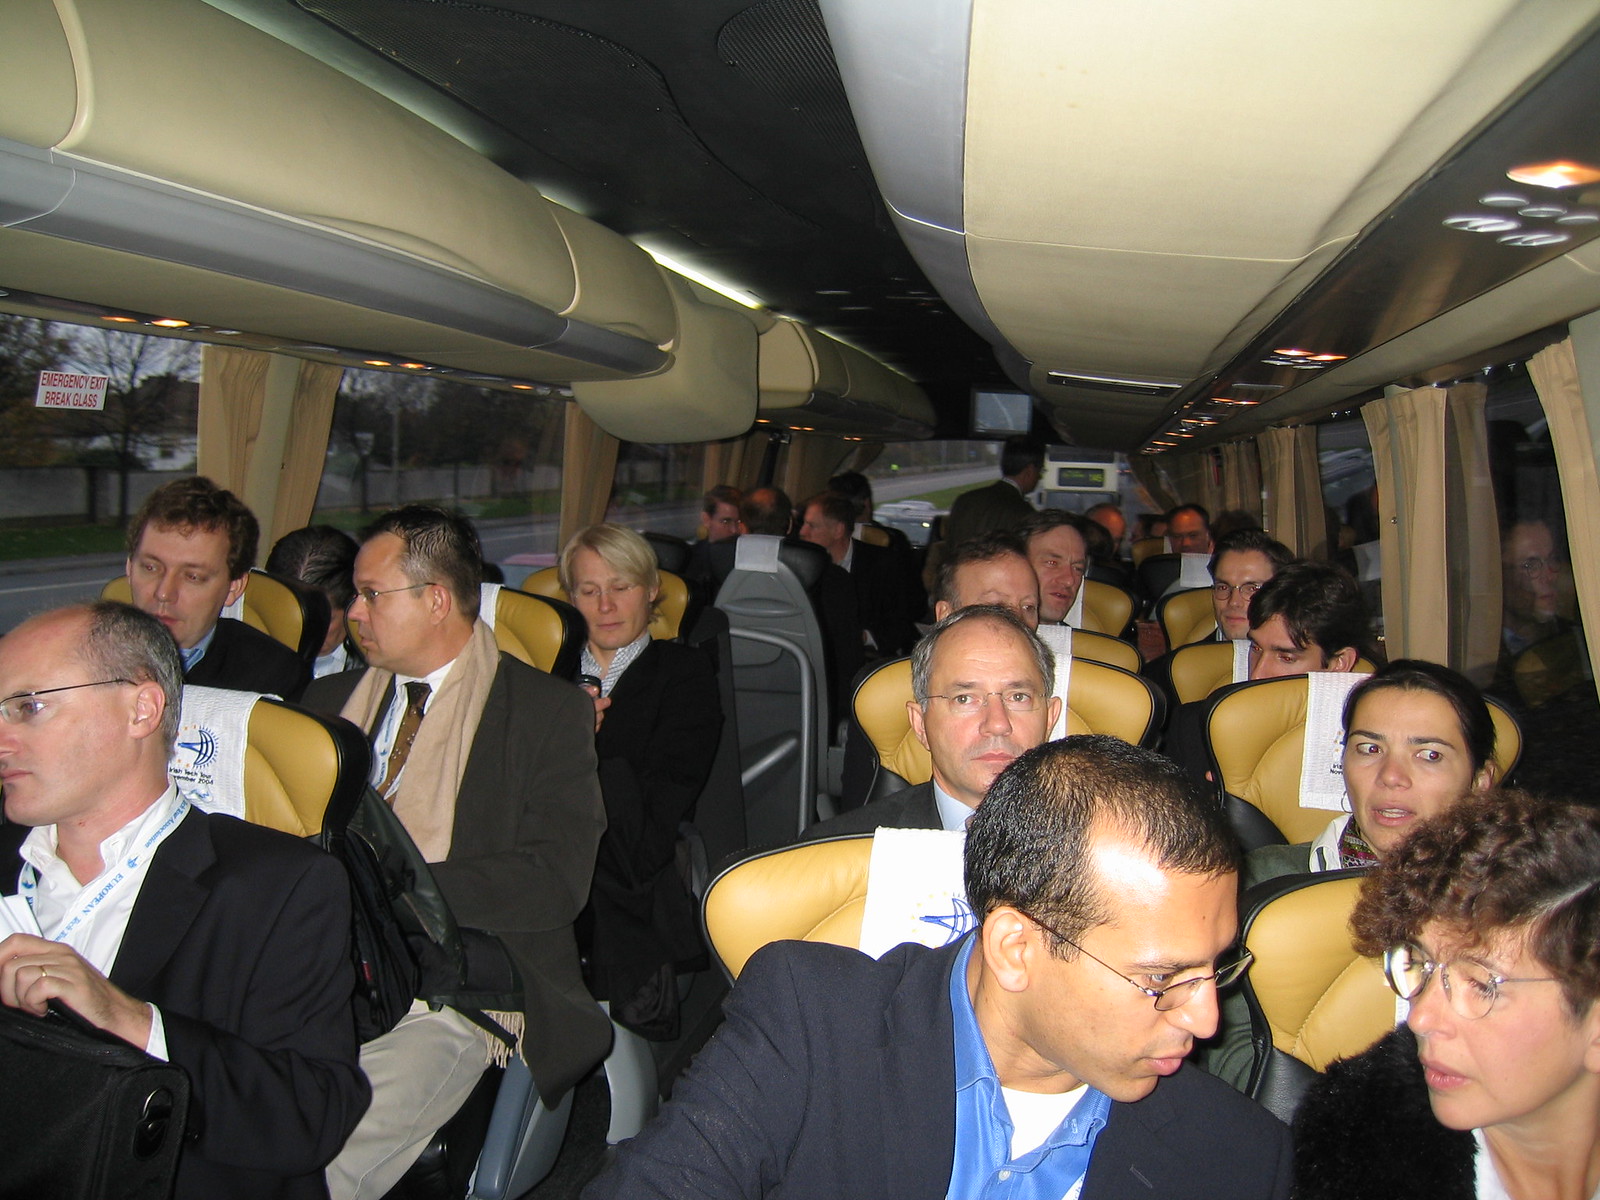 12 Networking on the bus